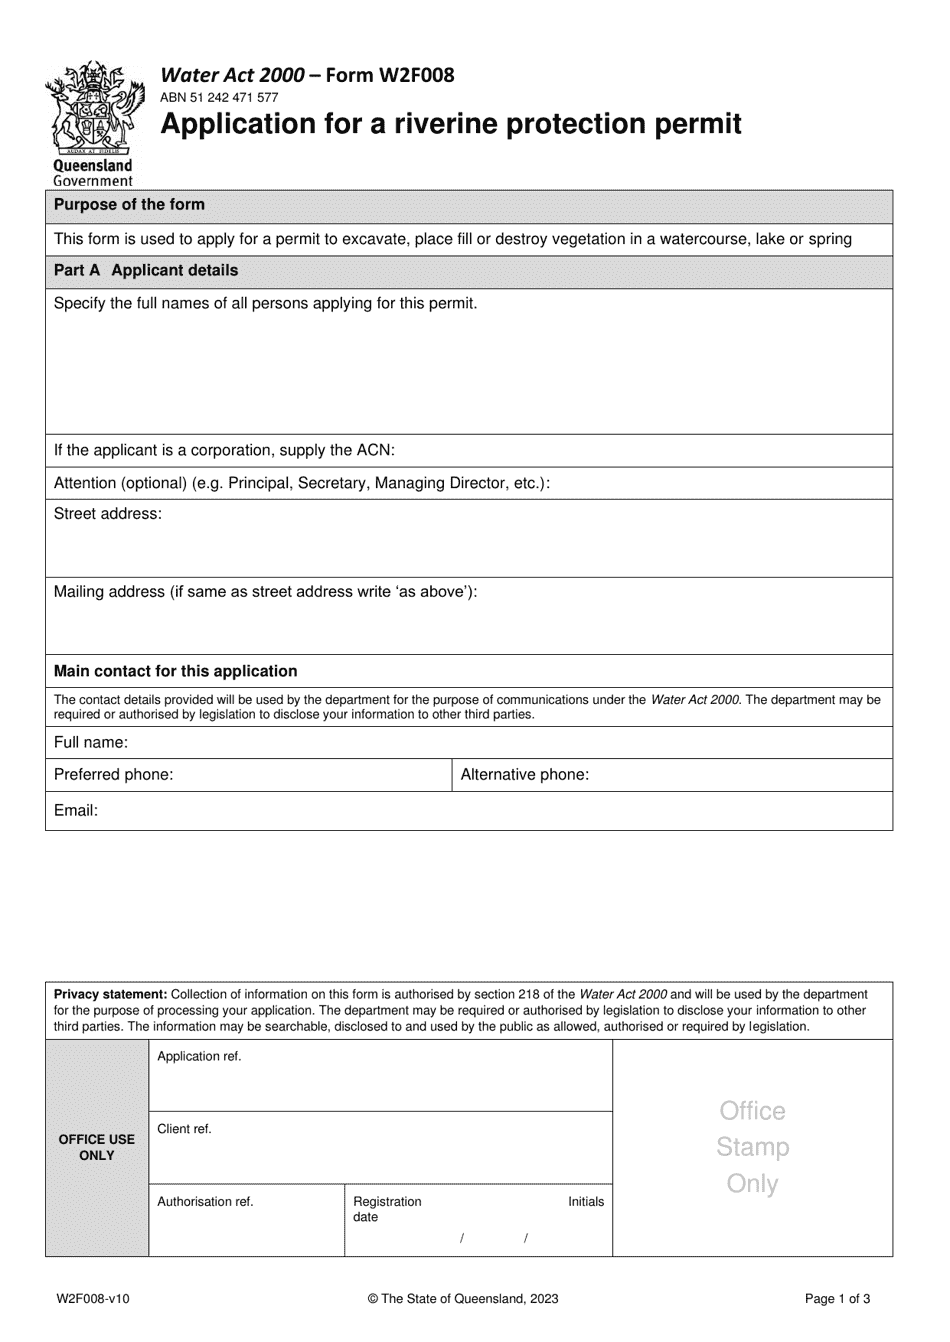 Form W2F008 Application for a Riverine Protection Permit - Queensland, Australia, Page 1